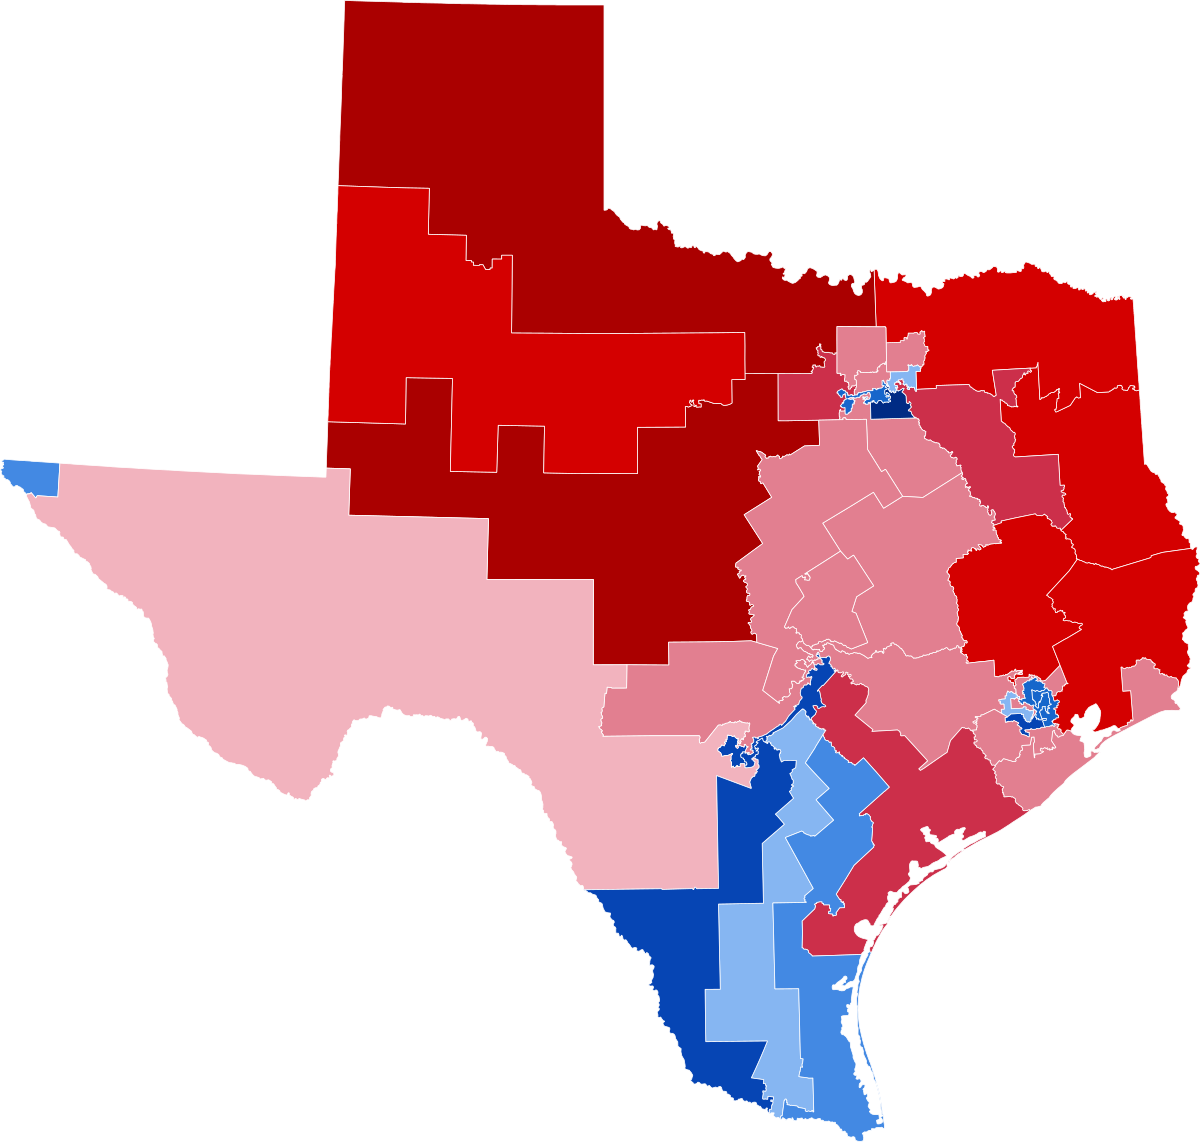 2018 United States House of Representatives elections in Texas